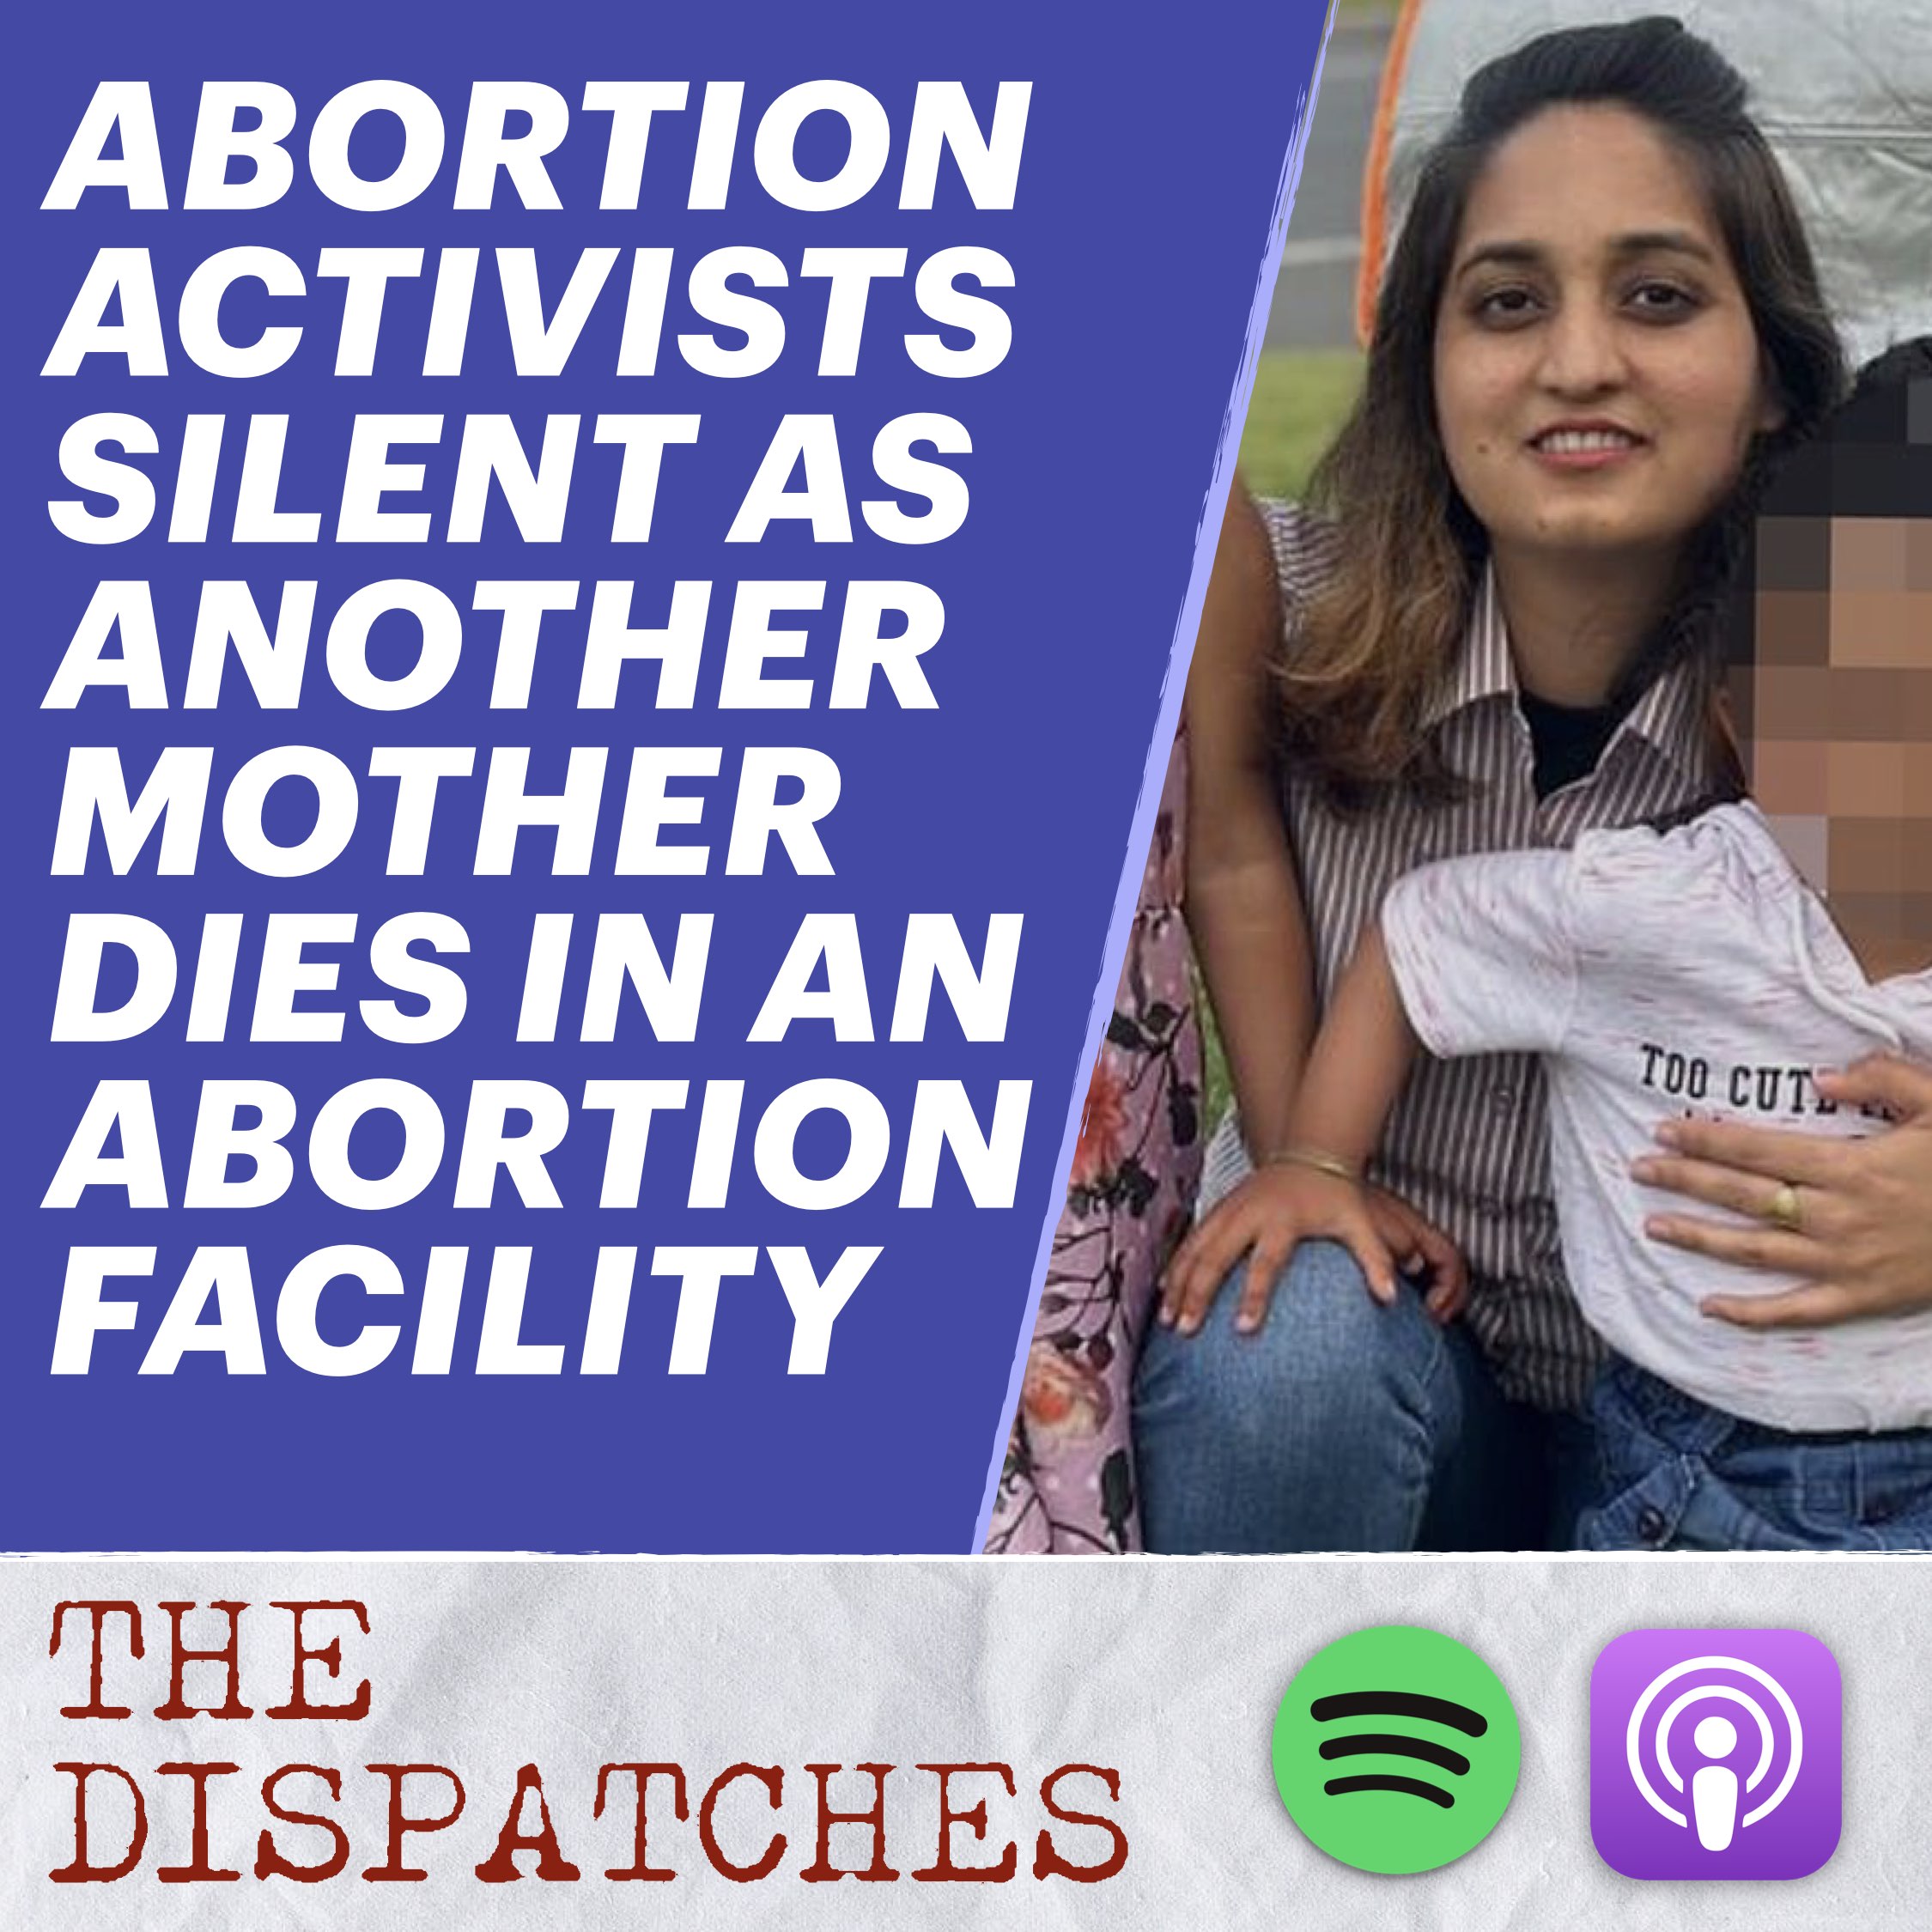 Abortion Activists Silent as Yet Another Mother Dies at an Abortion Facility